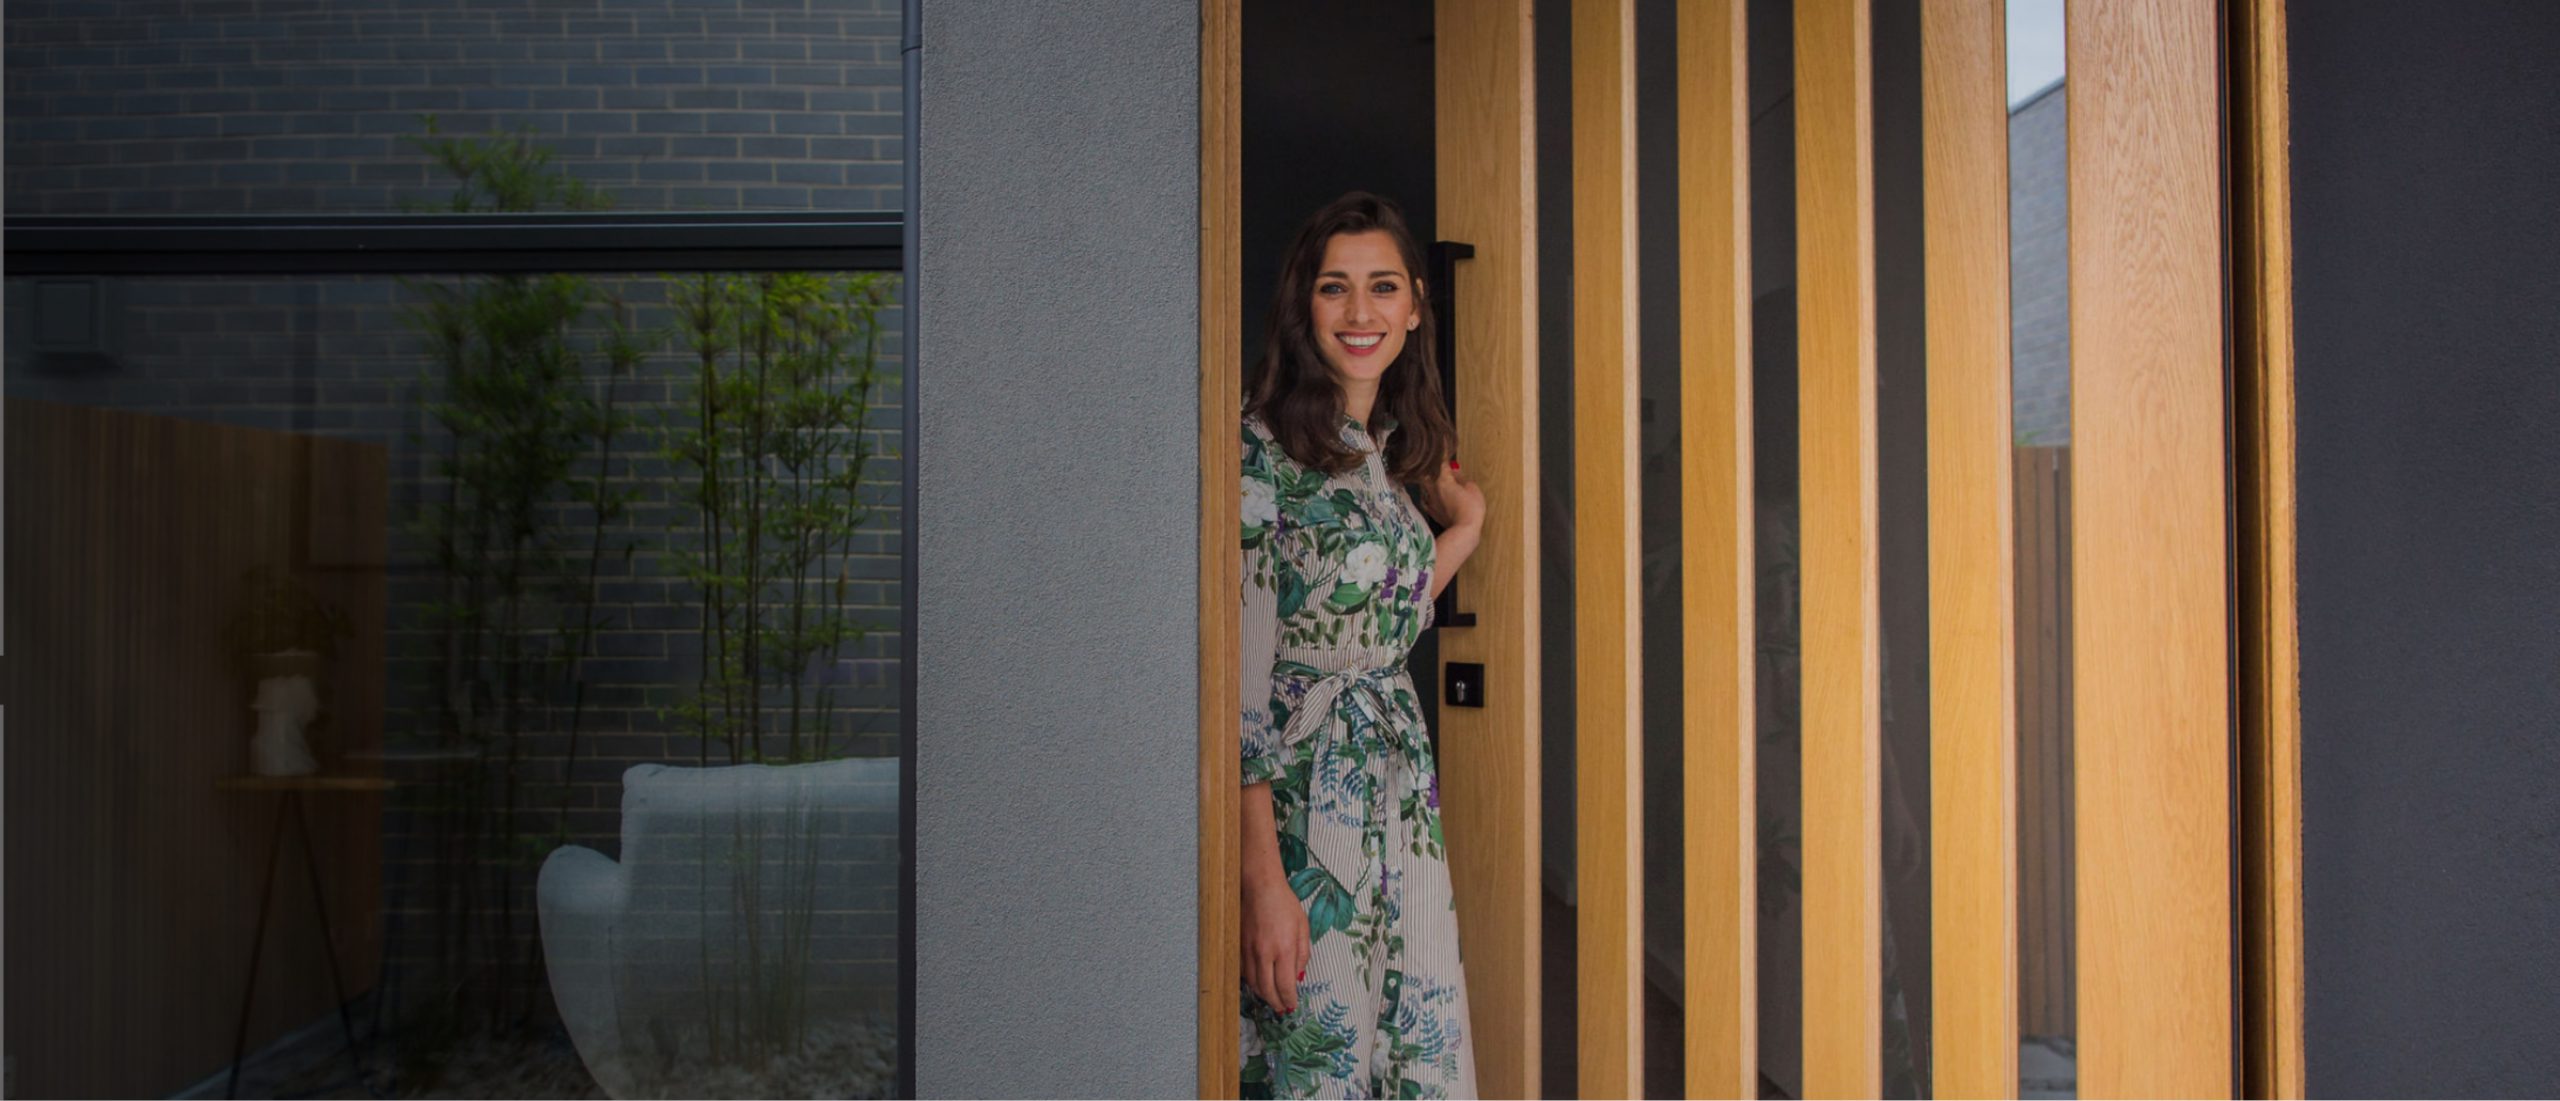 Smiling woman opening a timber front door